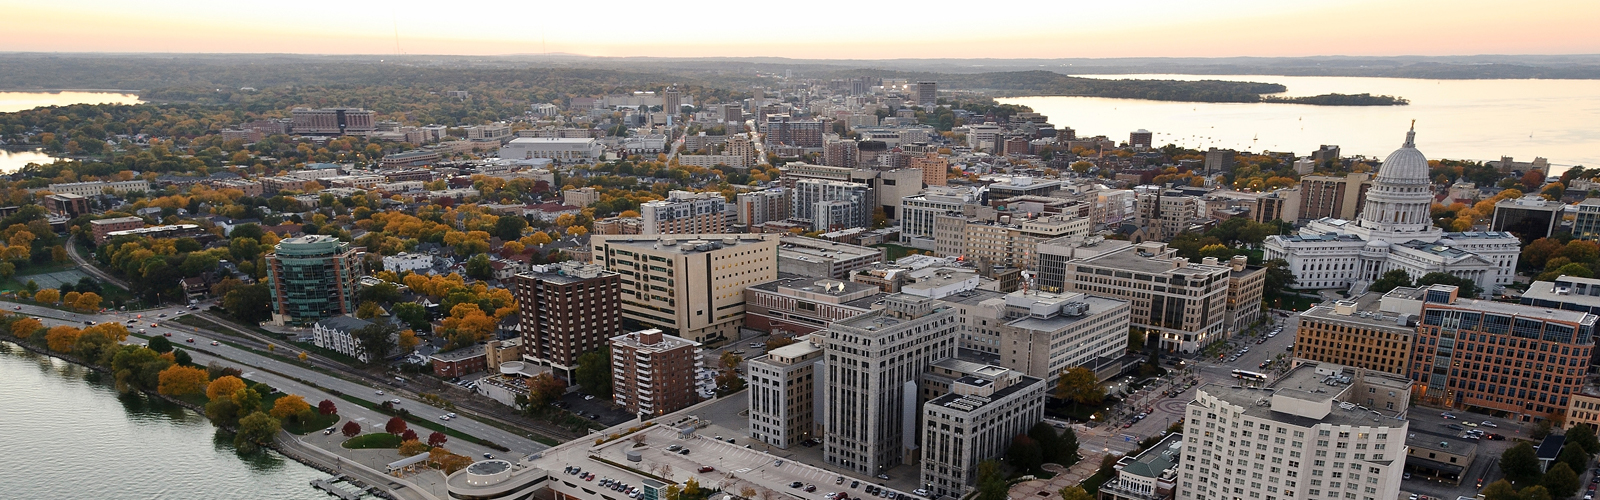 Aerial photo of the city of Madison with the capitol building